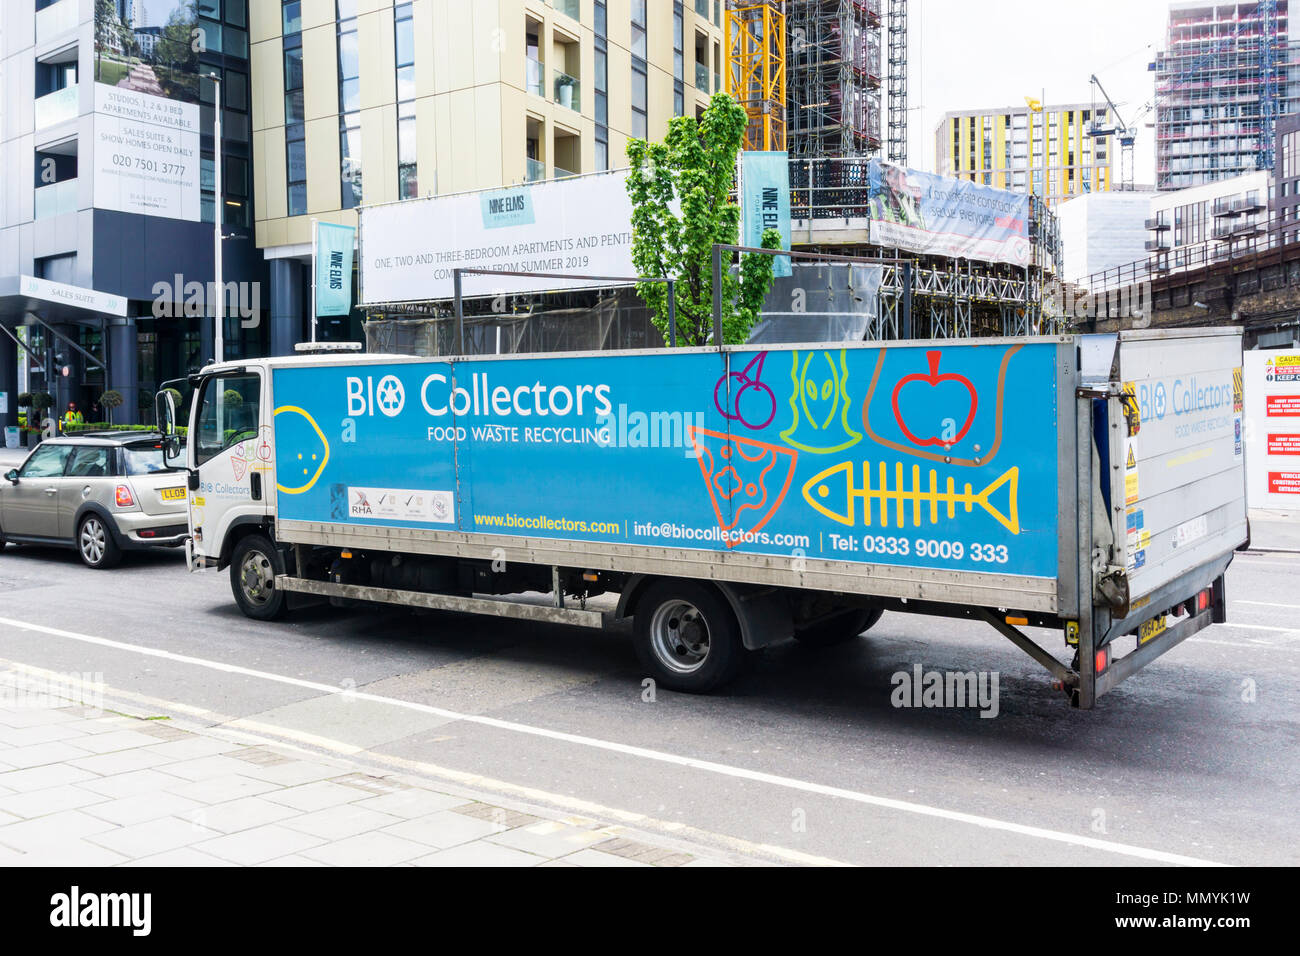 A Bio Collectors food waste recycling collection lorry in South London Stock Photo